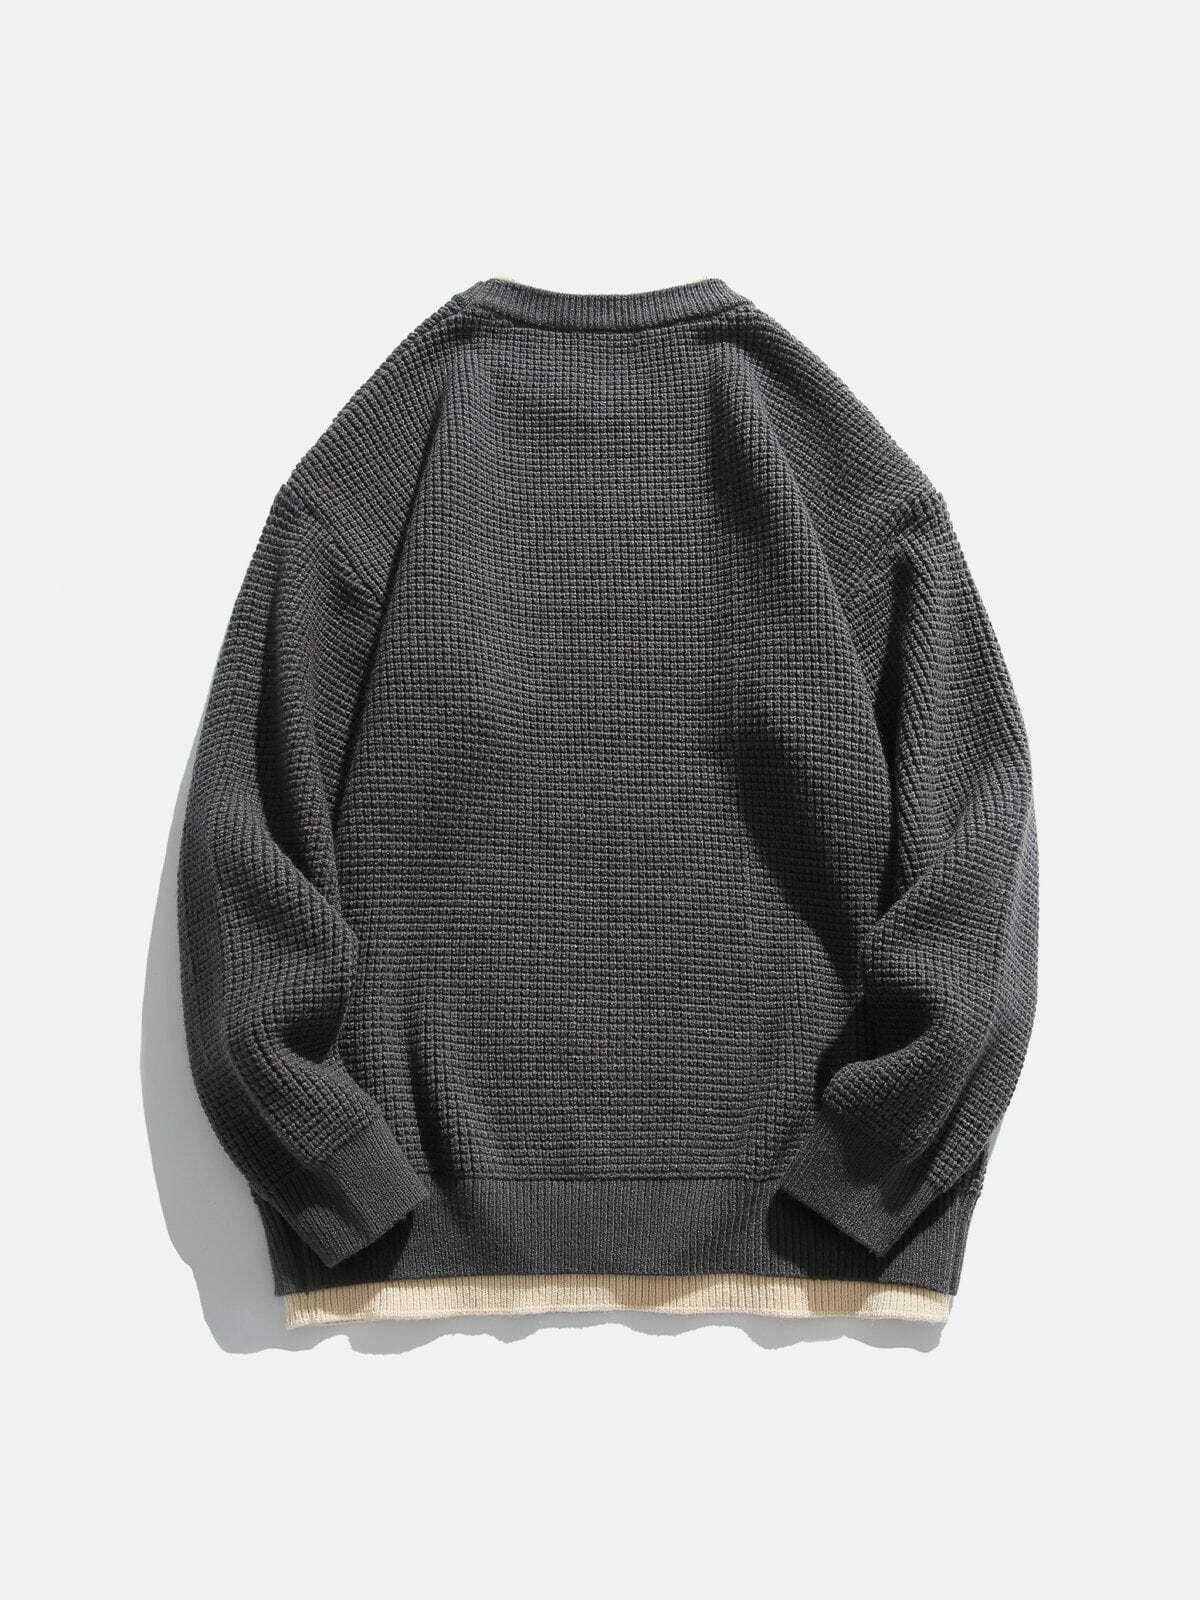 unique duallayer waffle sweater edgy & trendy streetwear 8716